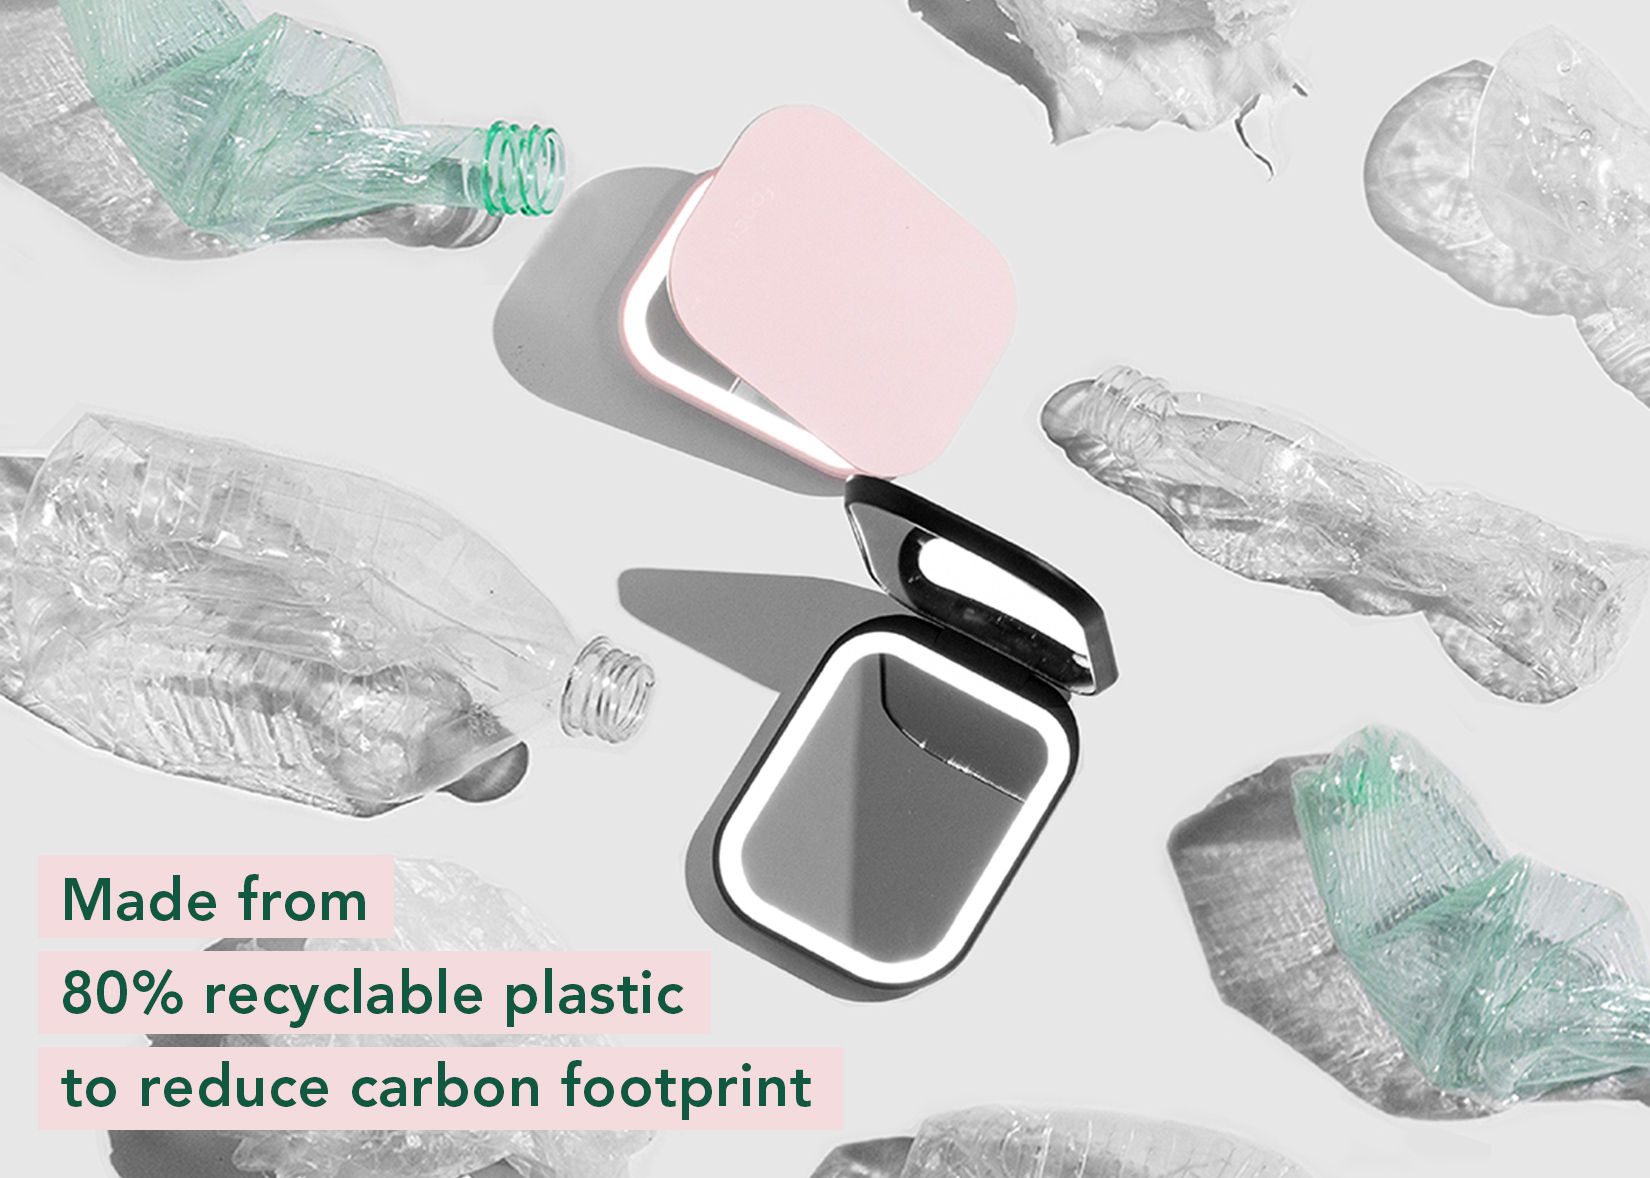 80% recyclable plastic material